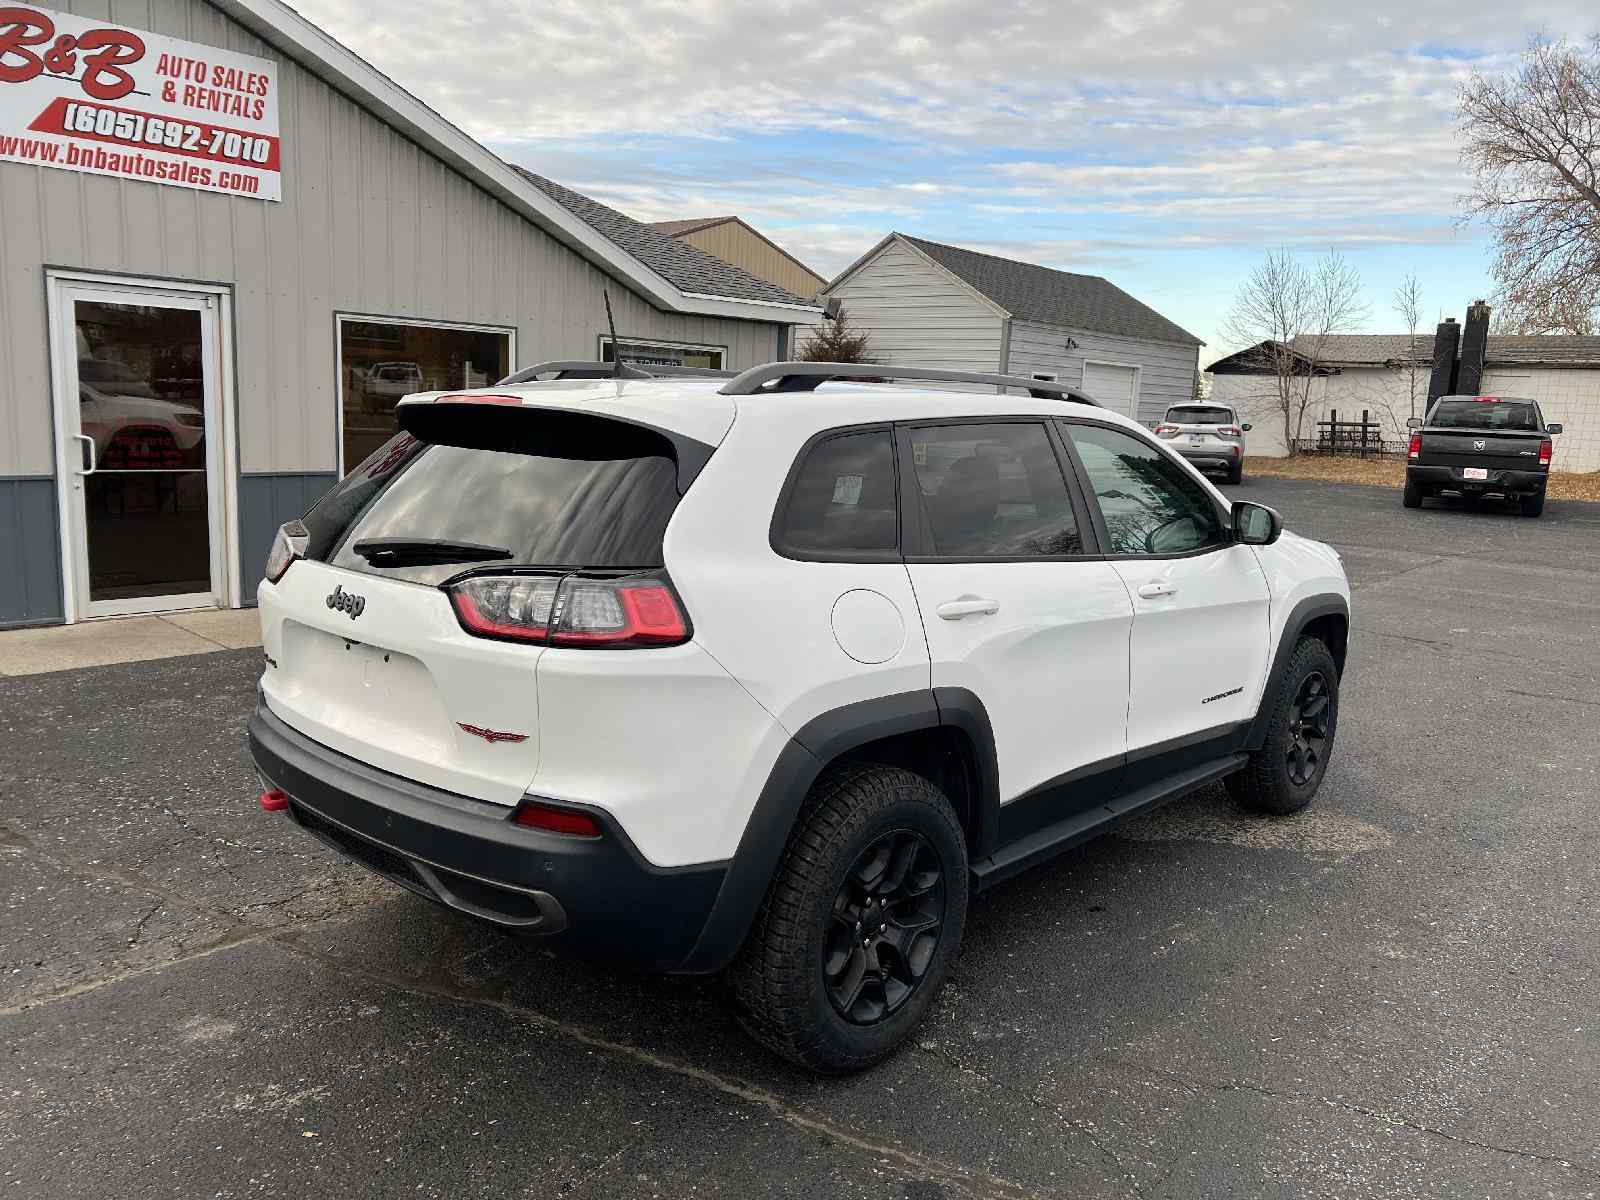 2019-jeep-cherokee-trailhawk-for-sale-08